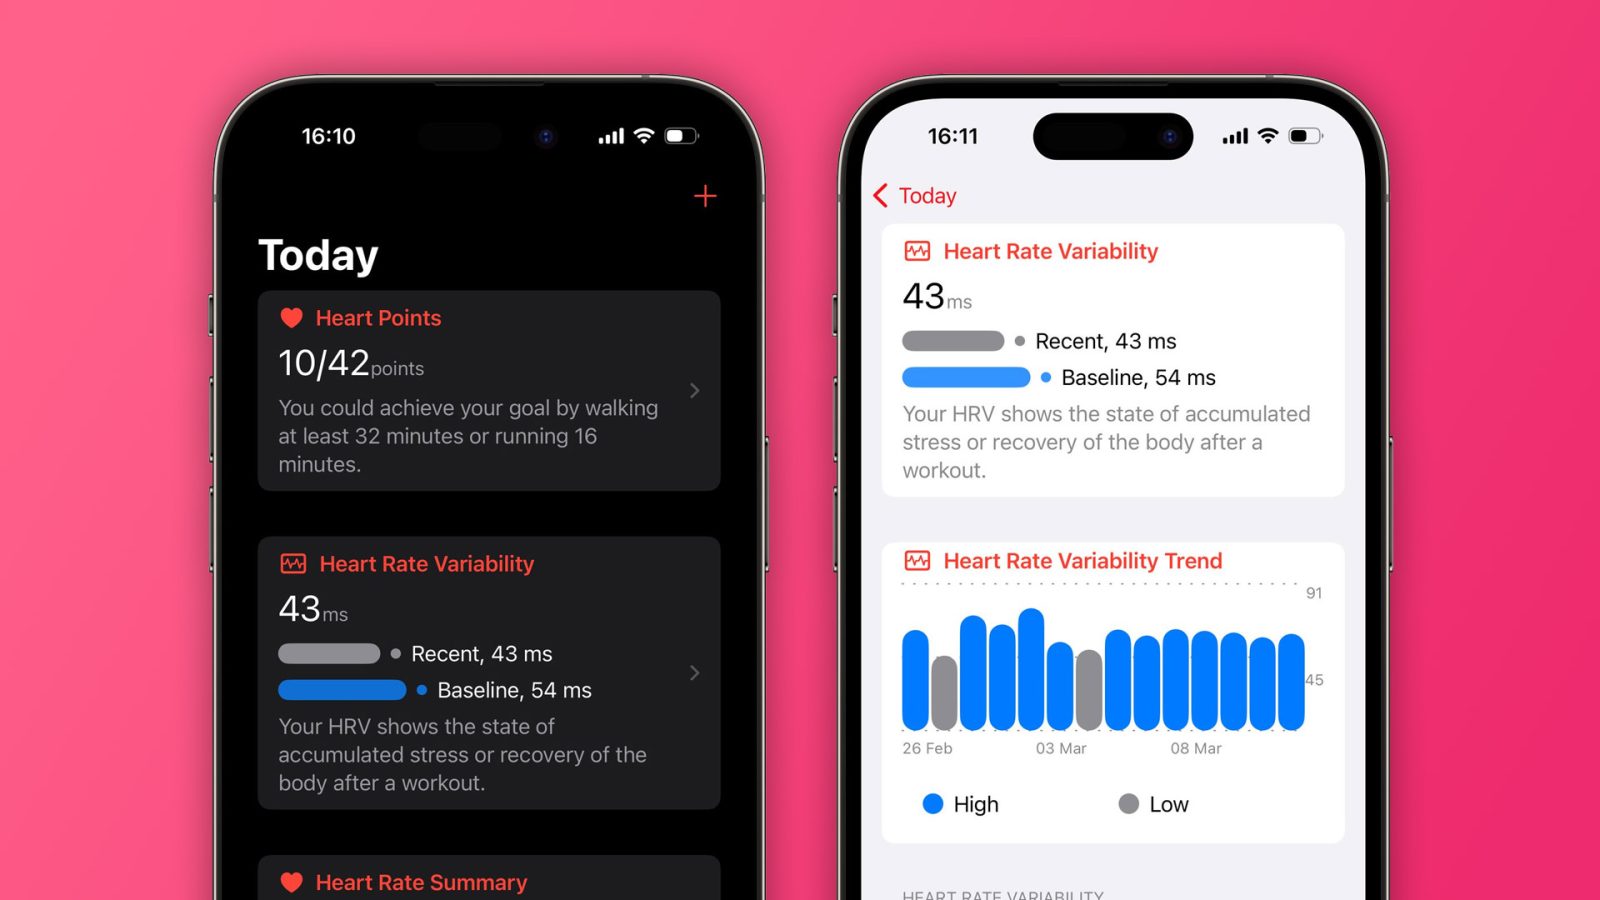 CardioBot can now measure stress levels based on data from your Apple Watch